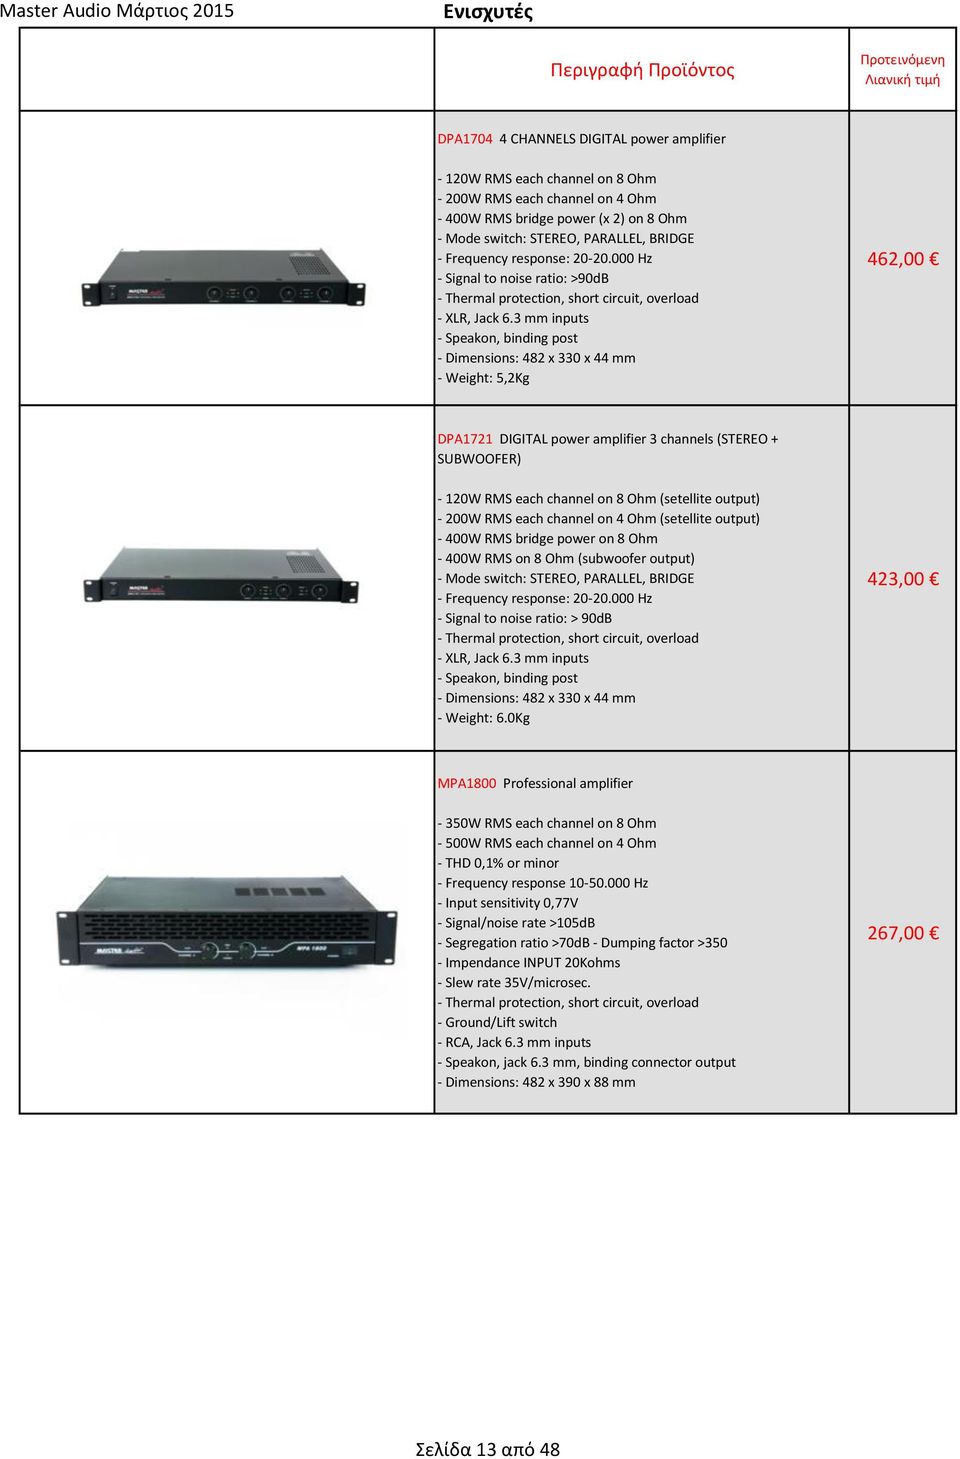 3 mm inputs - Speakon, binding post - Dimensions: 482 x 330 x 44 mm - Weight: 5,2Kg 462,00 DPA1721 DIGITAL power amplifier 3 channels (STEREO + SUBWOOFER) - 120W RMS each channel on 8 Ohm (setellite